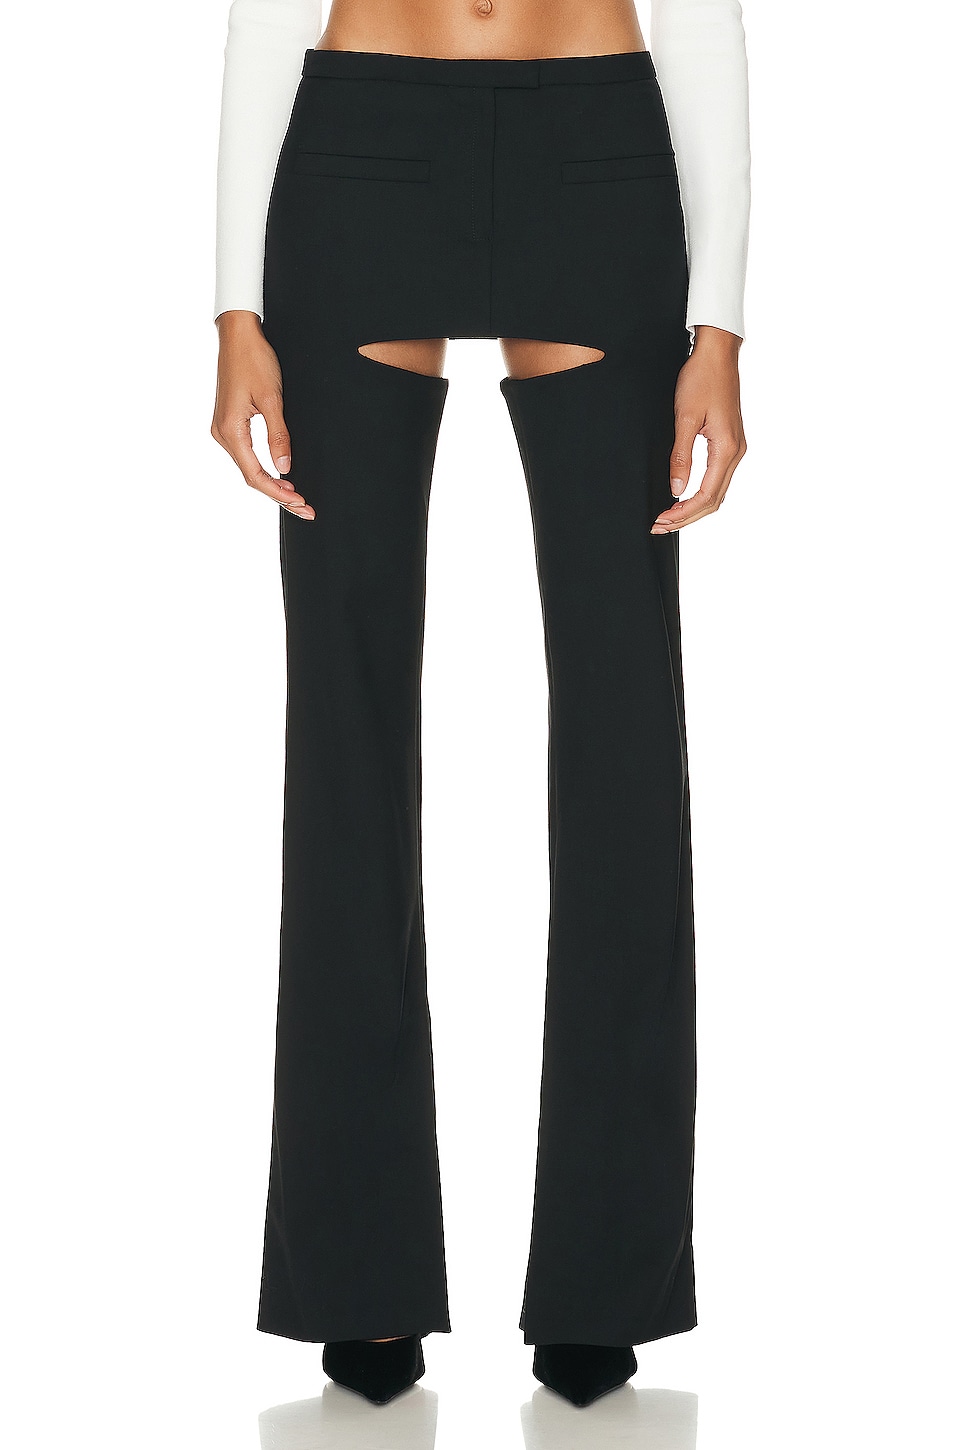 Image 1 of Courreges Chaps Wool Pant in Black